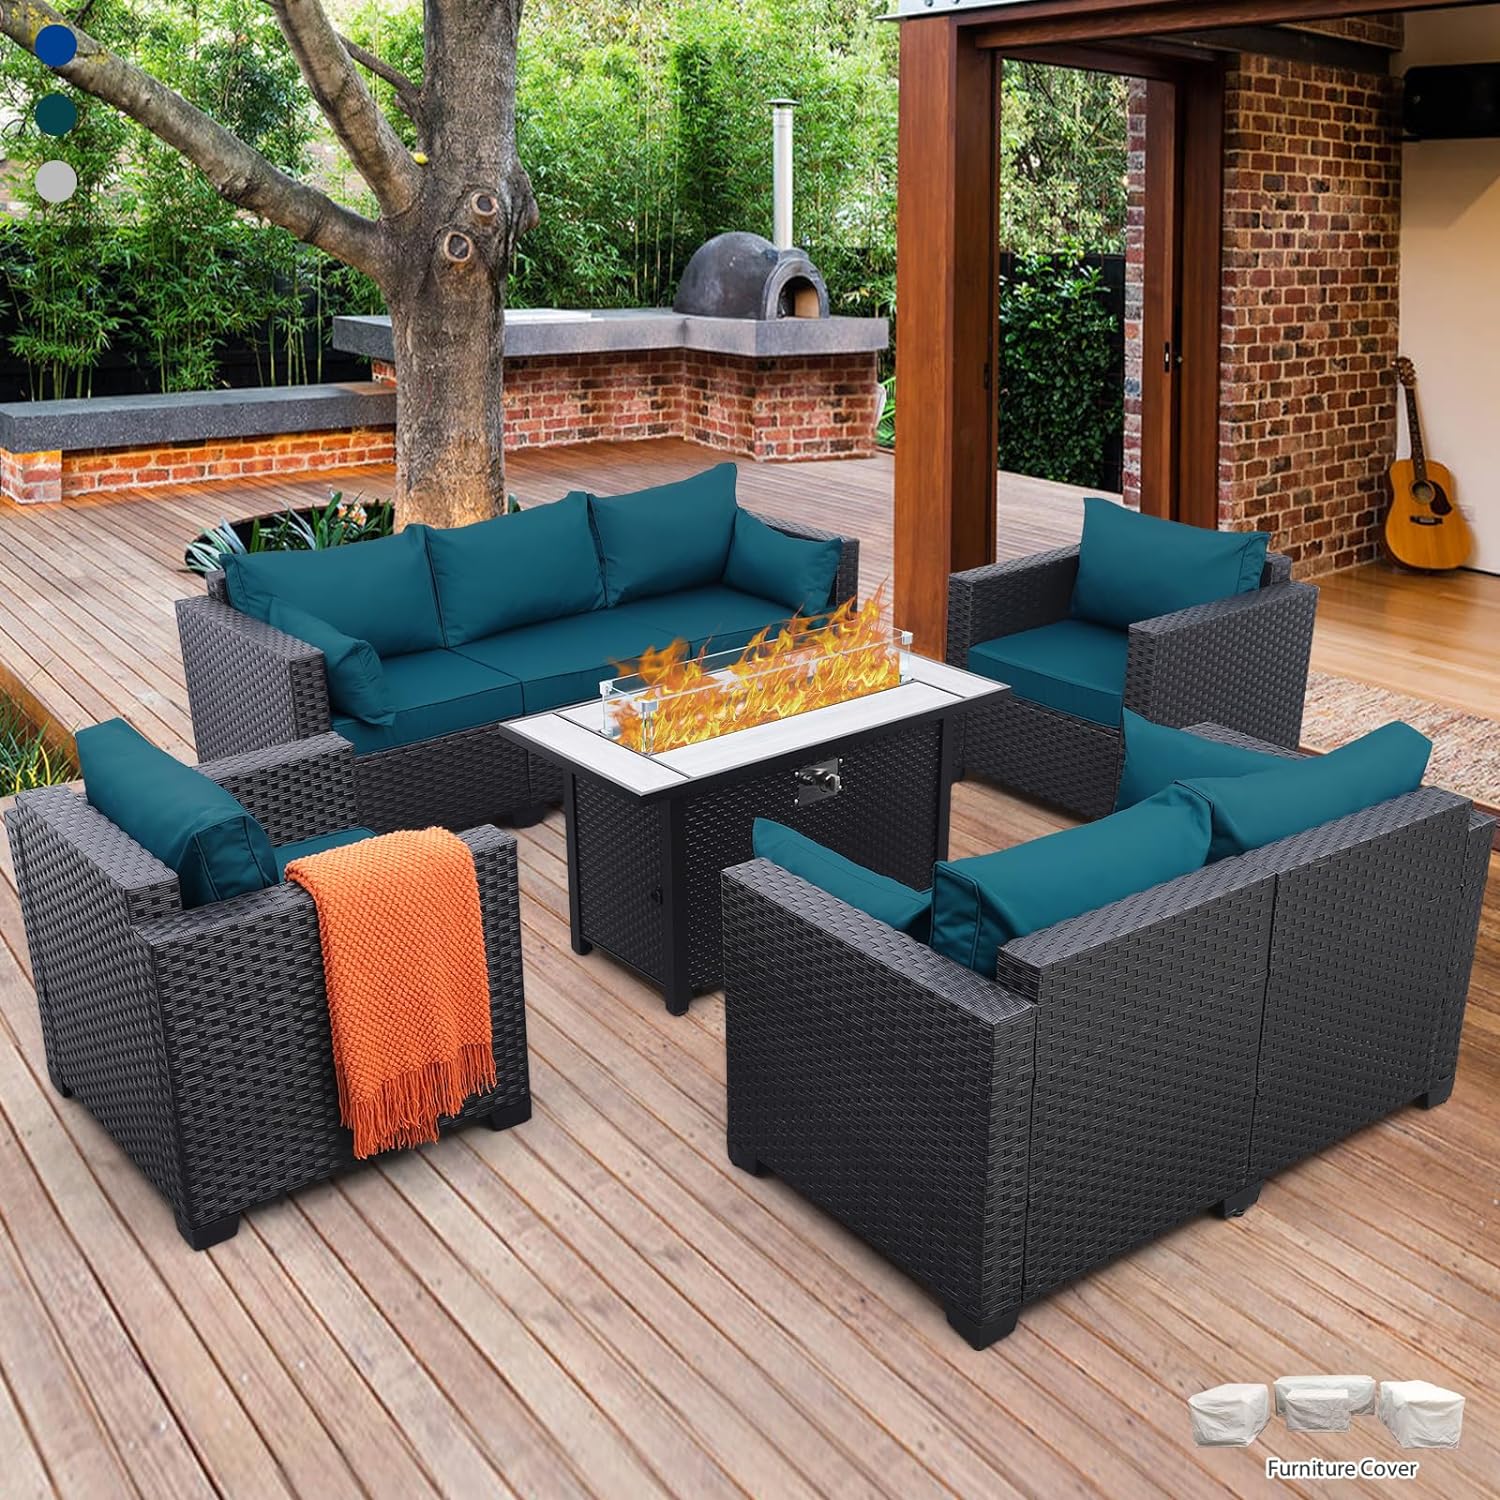 Patio Furniture Set with 45In Fire Pit 5 Pieces Outdoor Furniture Sets Patio Couch Outdoor Chairs 60000 BTU Wicker Propane Fire Pit Table with No-slip Cushions and Waterproof Covers, Peacock Blue